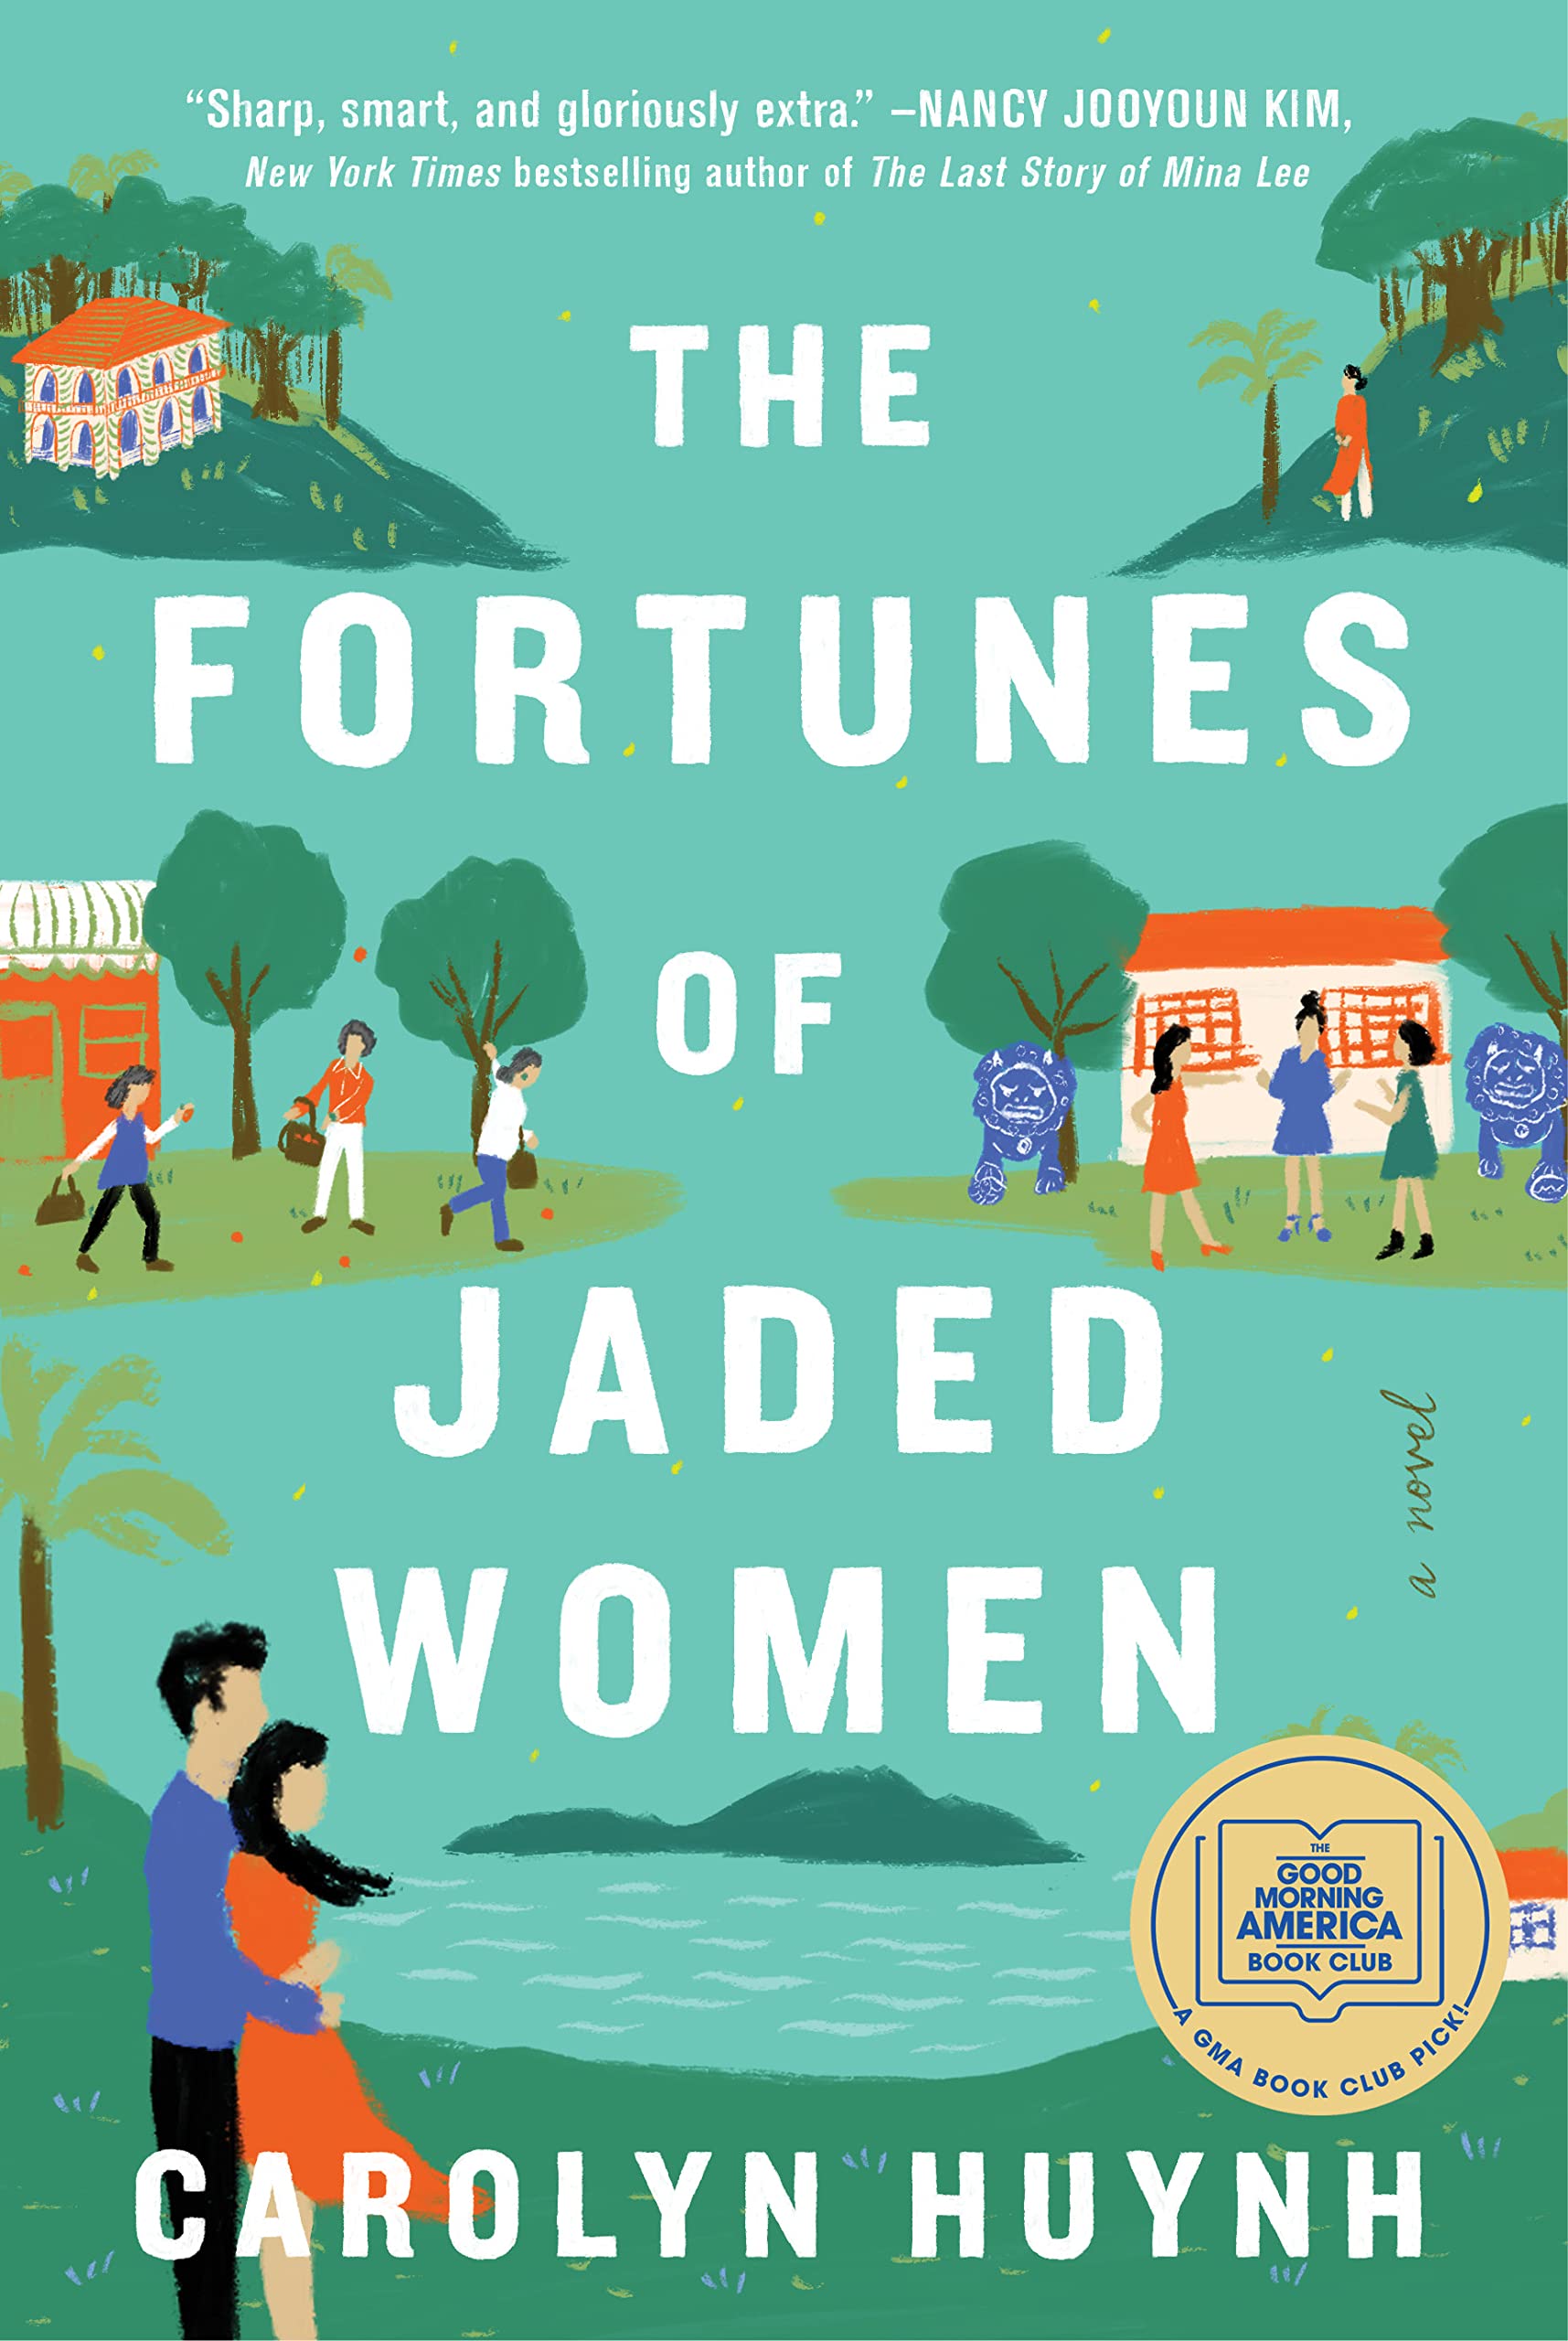 Image for "The Fortunes of Jaded Women"